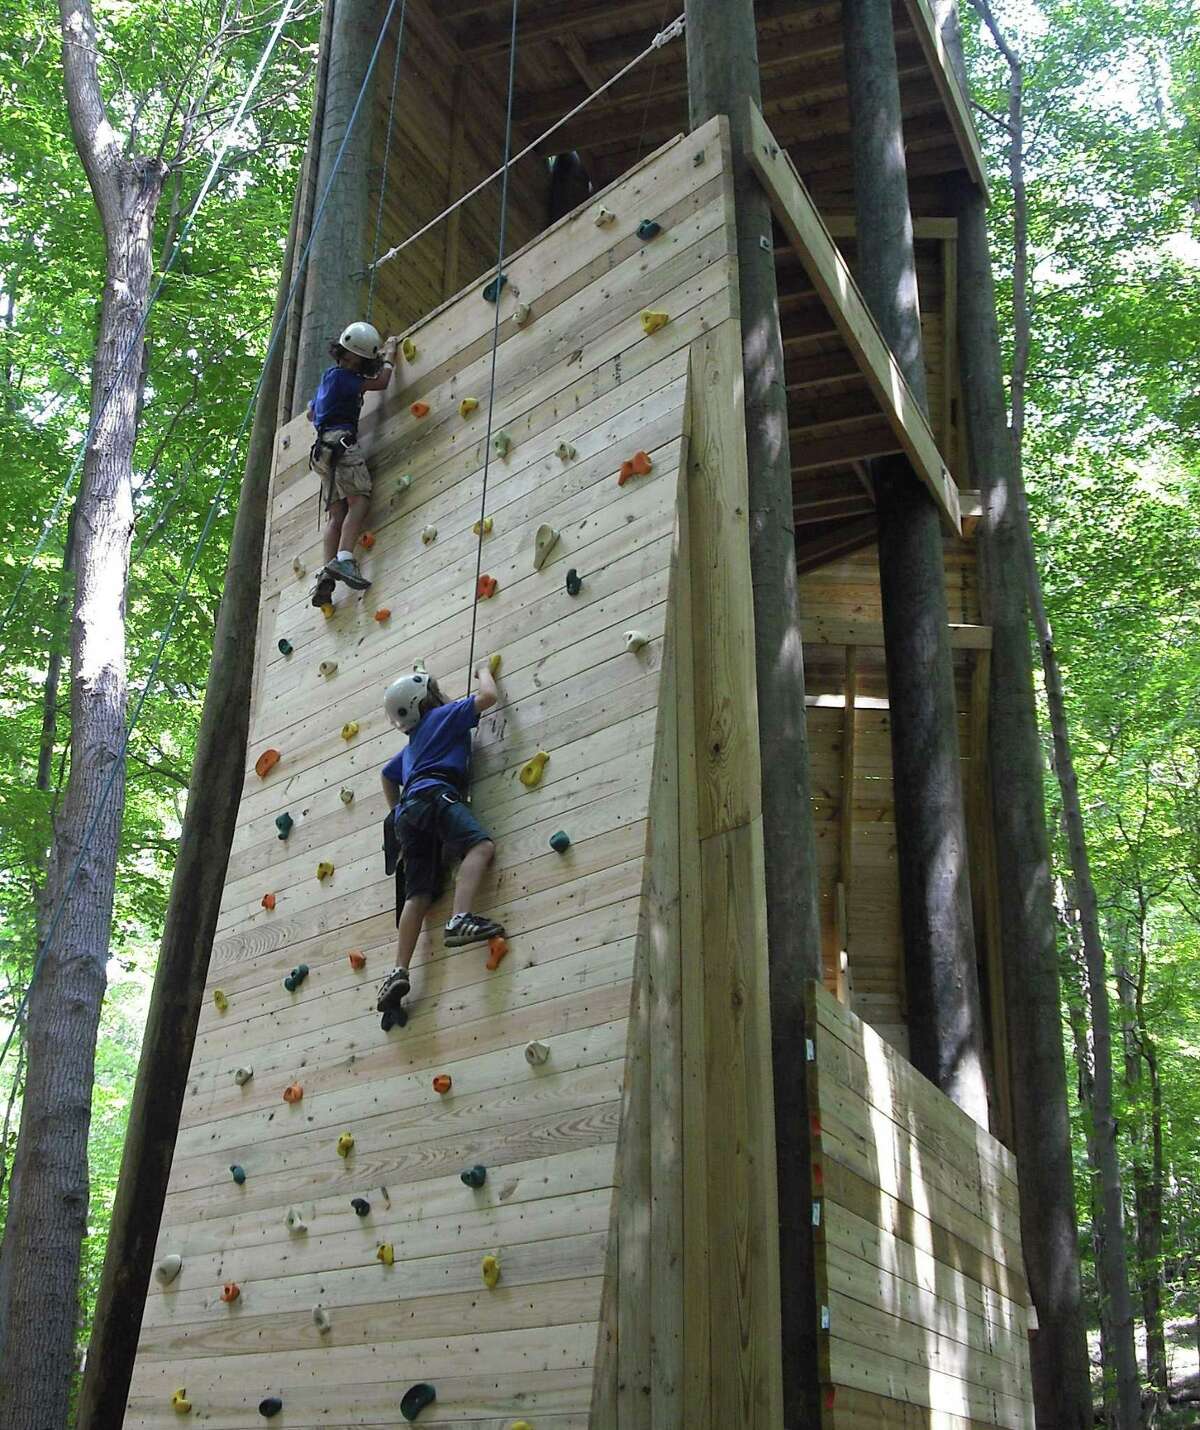 The Ernest Thompson Seton Scout Reservation includes a 45-foot climbing wall.